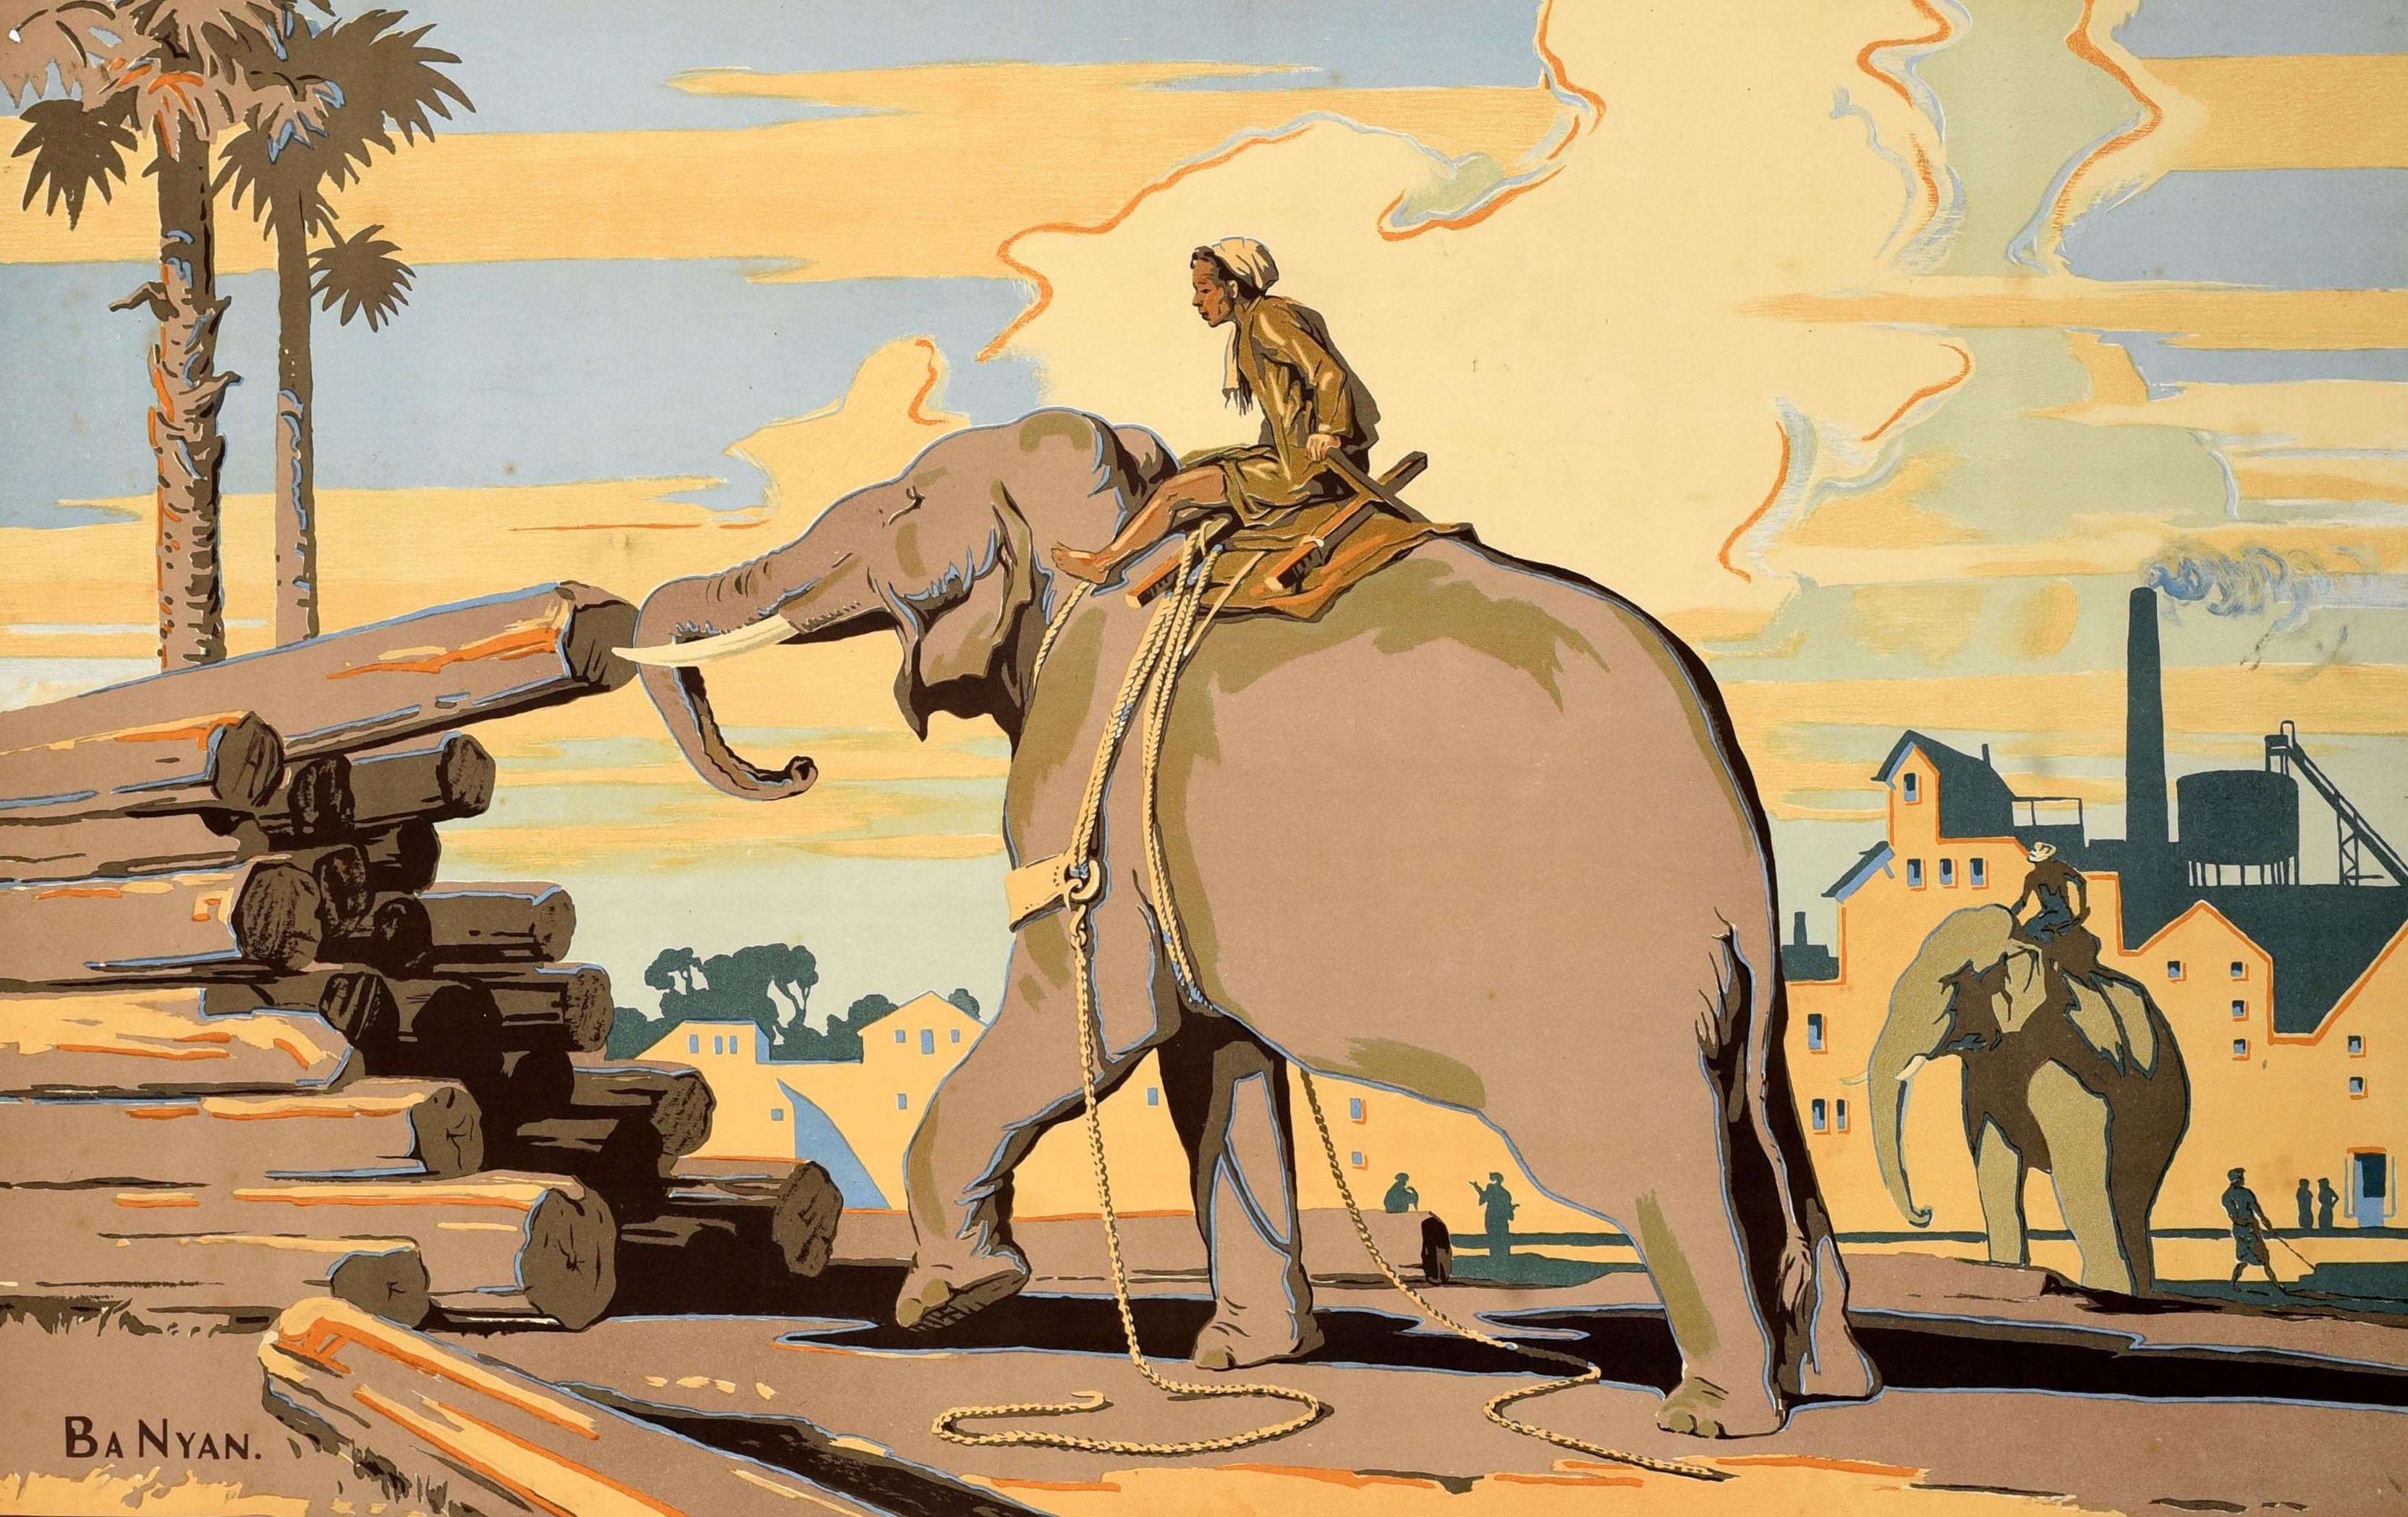 Original vintage poster - Timber Stacking - issued by the Empire Marketing Board (EMB 1926-1933) featuring artwork by the notable Burmese artist Ba Nyan (1897-1945) depicting a man riding an elephant and guiding it to stack up logs of wood with